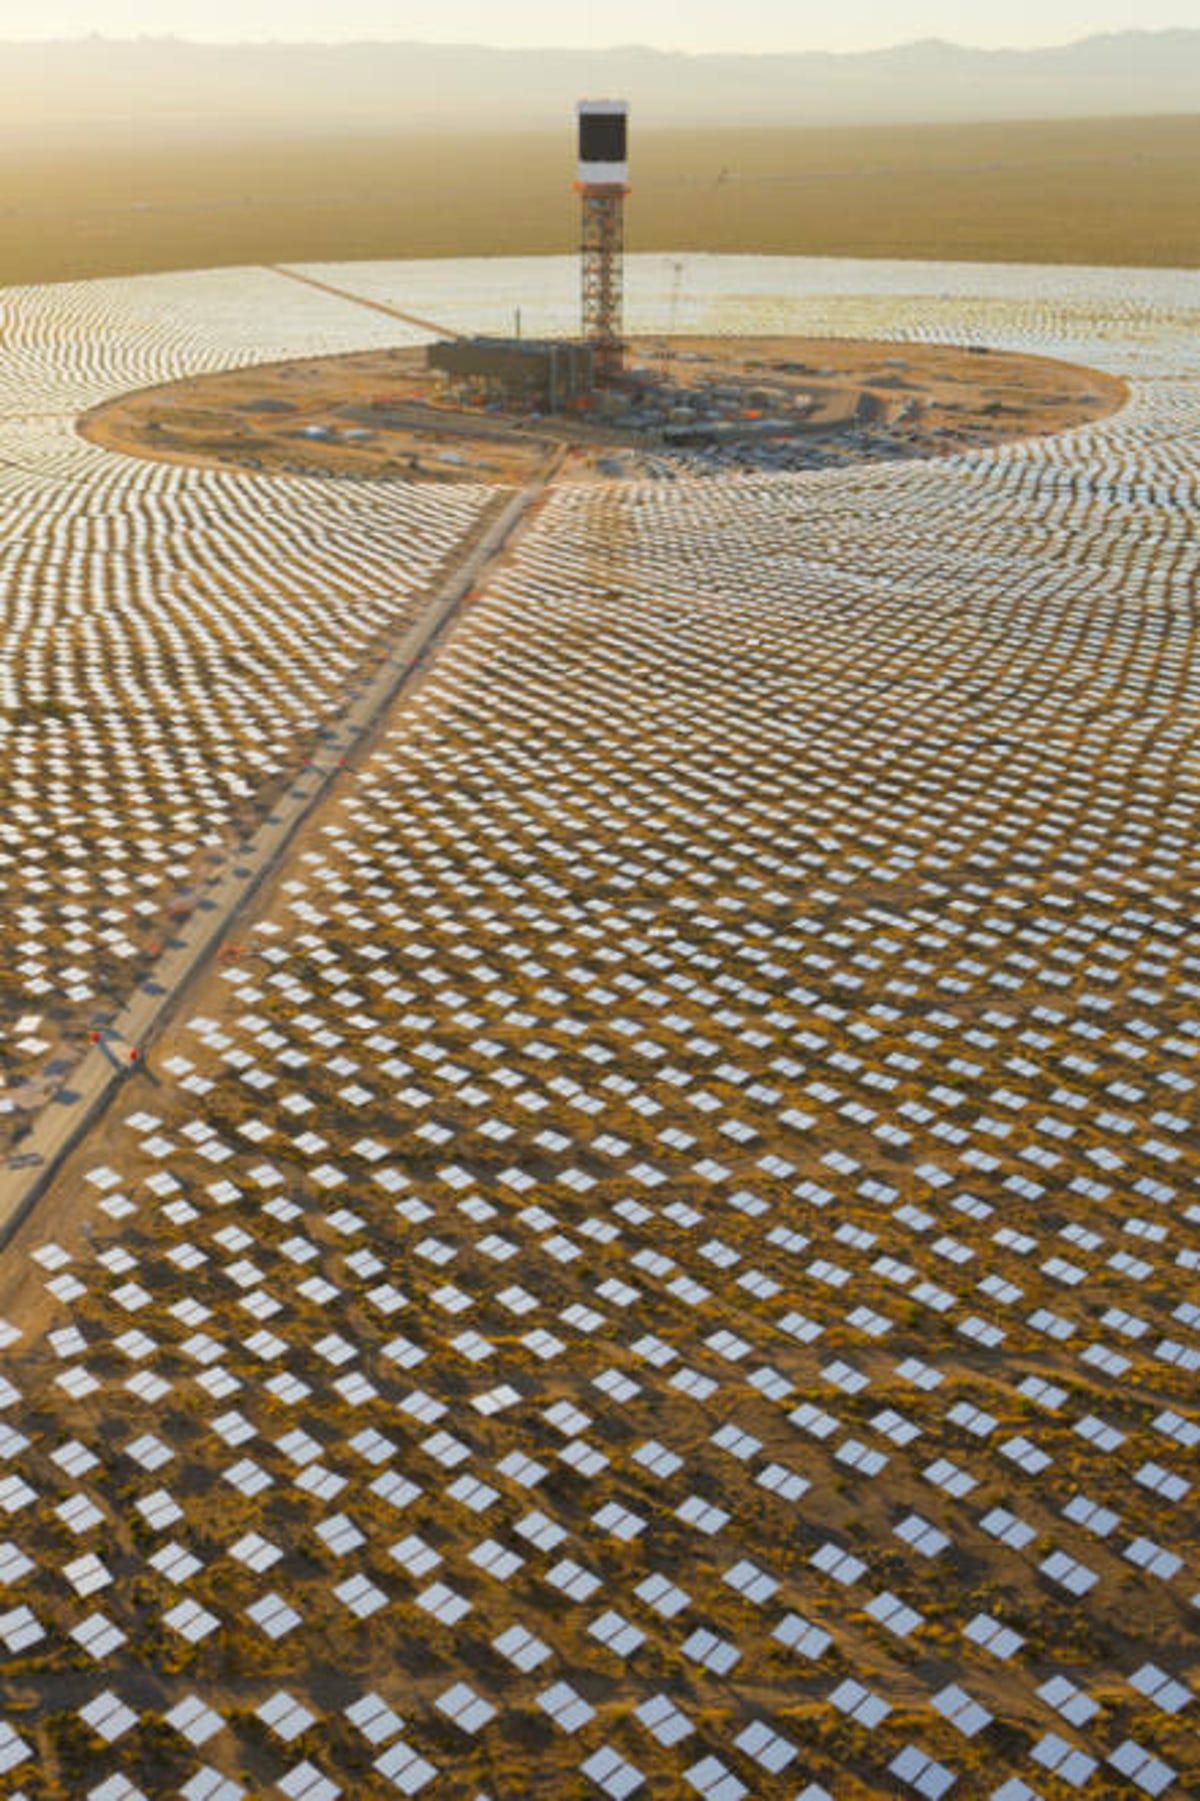 World's largest solar thermal plant